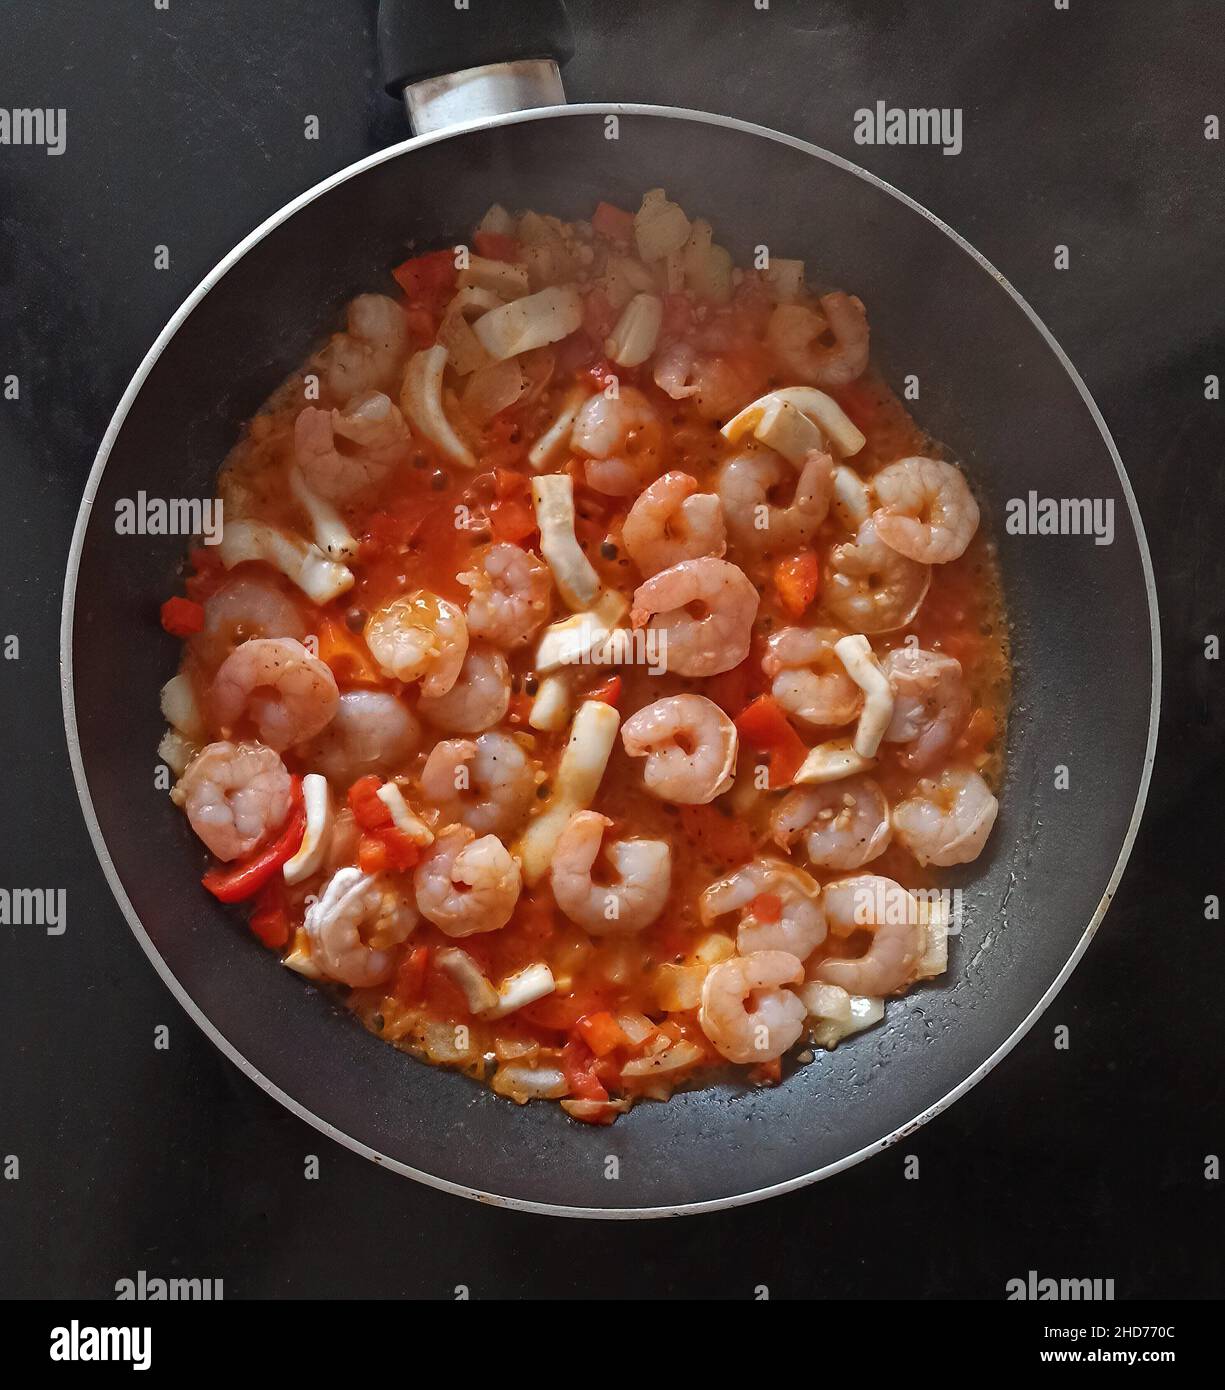 Fried Shrimps in Tomato Sauce (with onions, red peppers and squid rings). Stock Photo